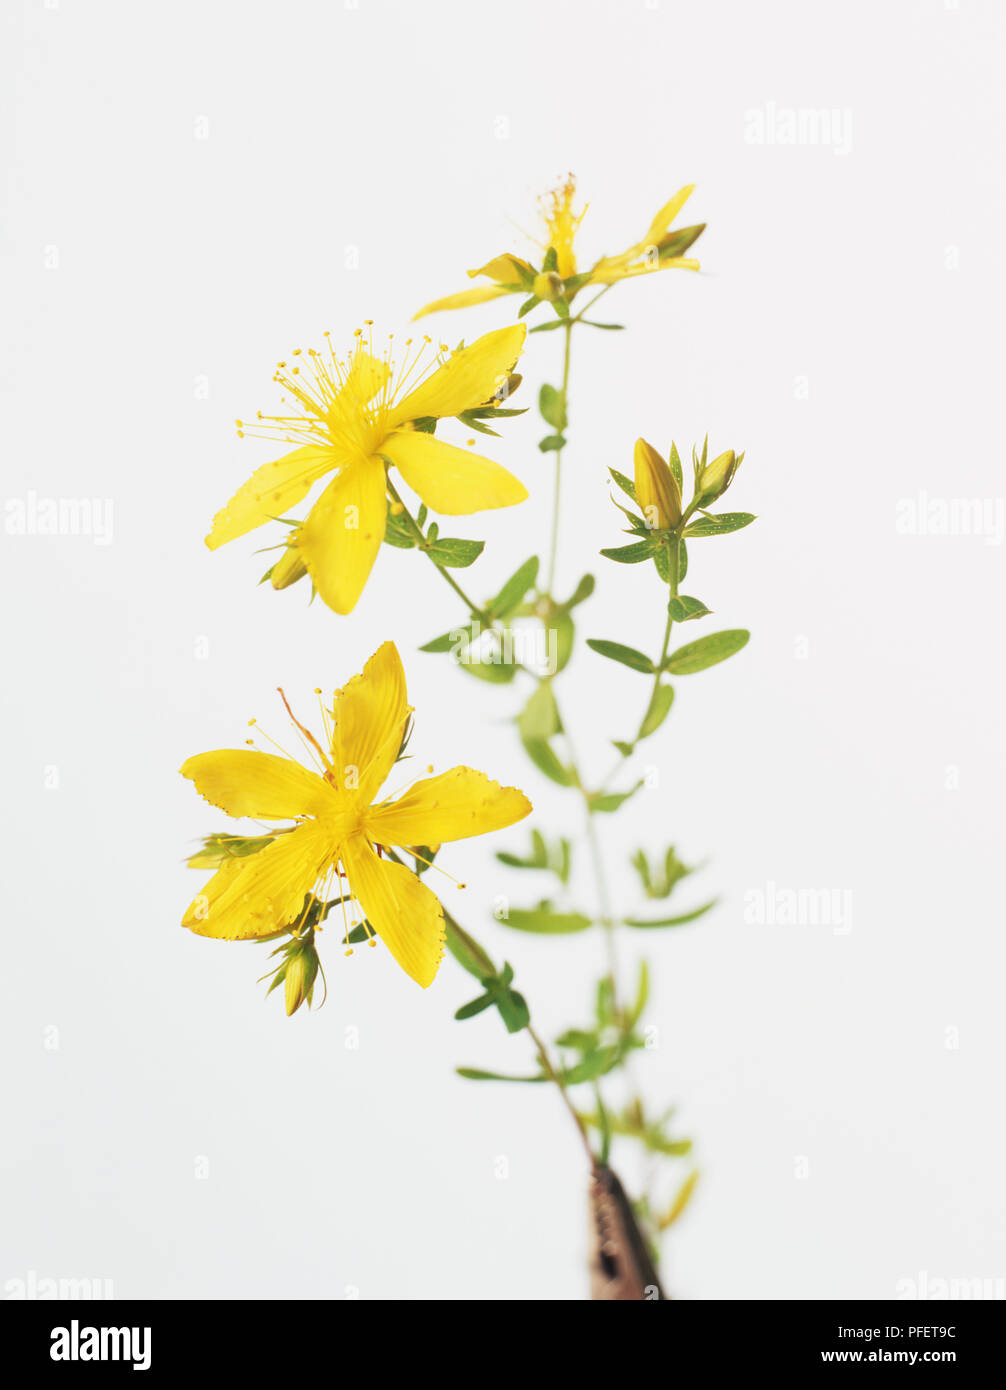 St. John's Wort (Hypericum perforatum), yellow flowers with tiny black gland dots on petals, buds and small, oval, green leaves covered with tiny translucent spots on thin stems Stock Photo